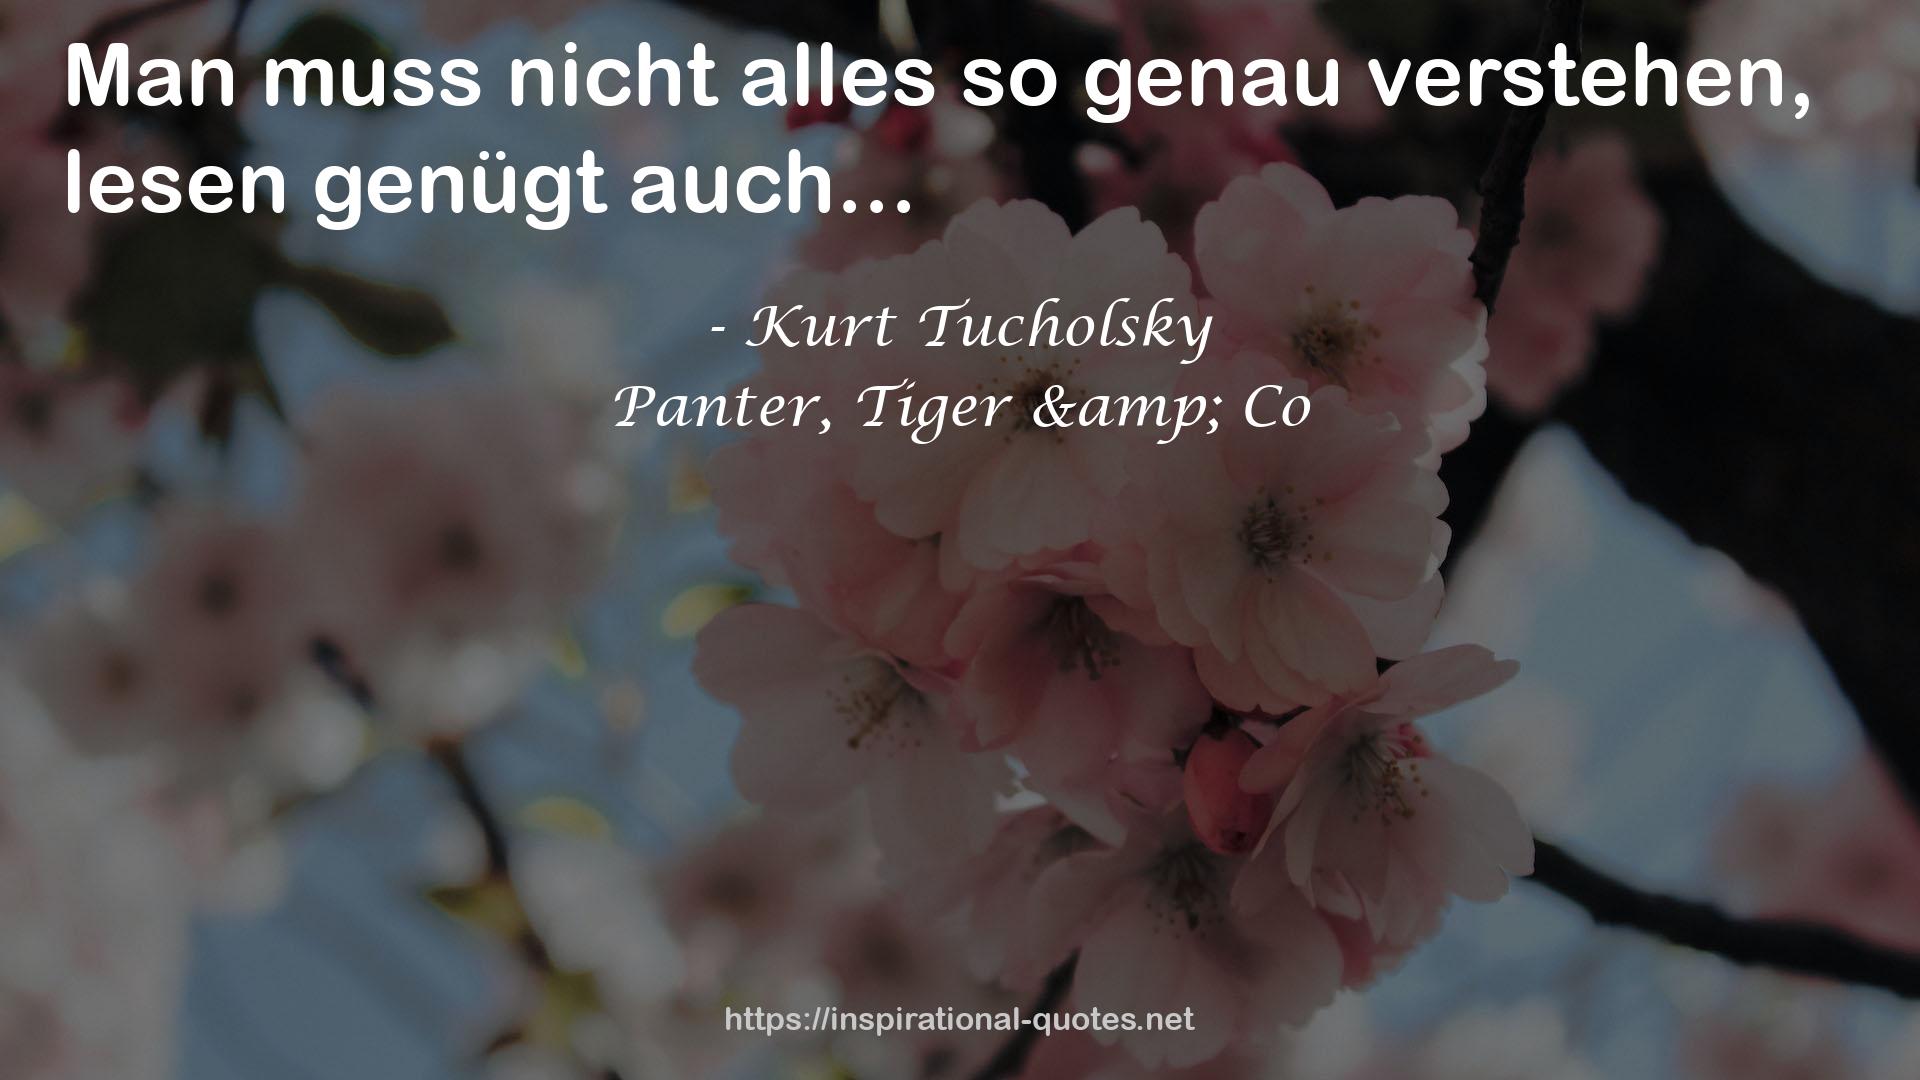 Panter, Tiger & Co QUOTES